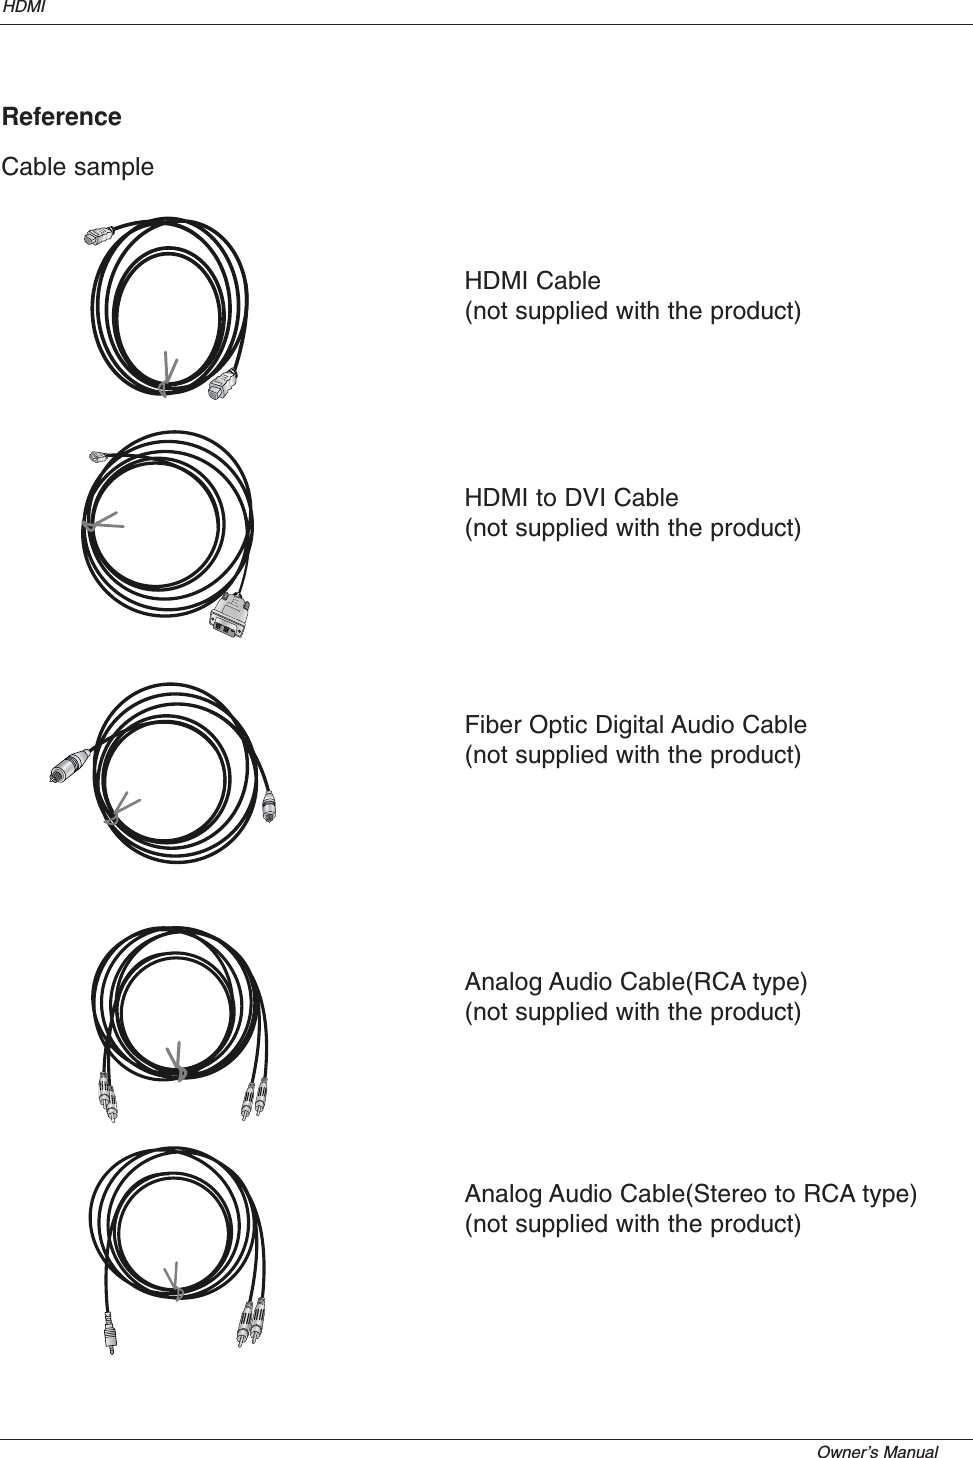 Owner’s Manual  HDMIReferenceCable sampleHDMI Cable (not supplied with the product)HDMI to DVI Cable (not supplied with the product)Fiber Optic Digital Audio Cable(not supplied with the product)Analog Audio Cable(RCA type)(not supplied with the product)Analog Audio Cable(Stereo to RCA type)(not supplied with the product)